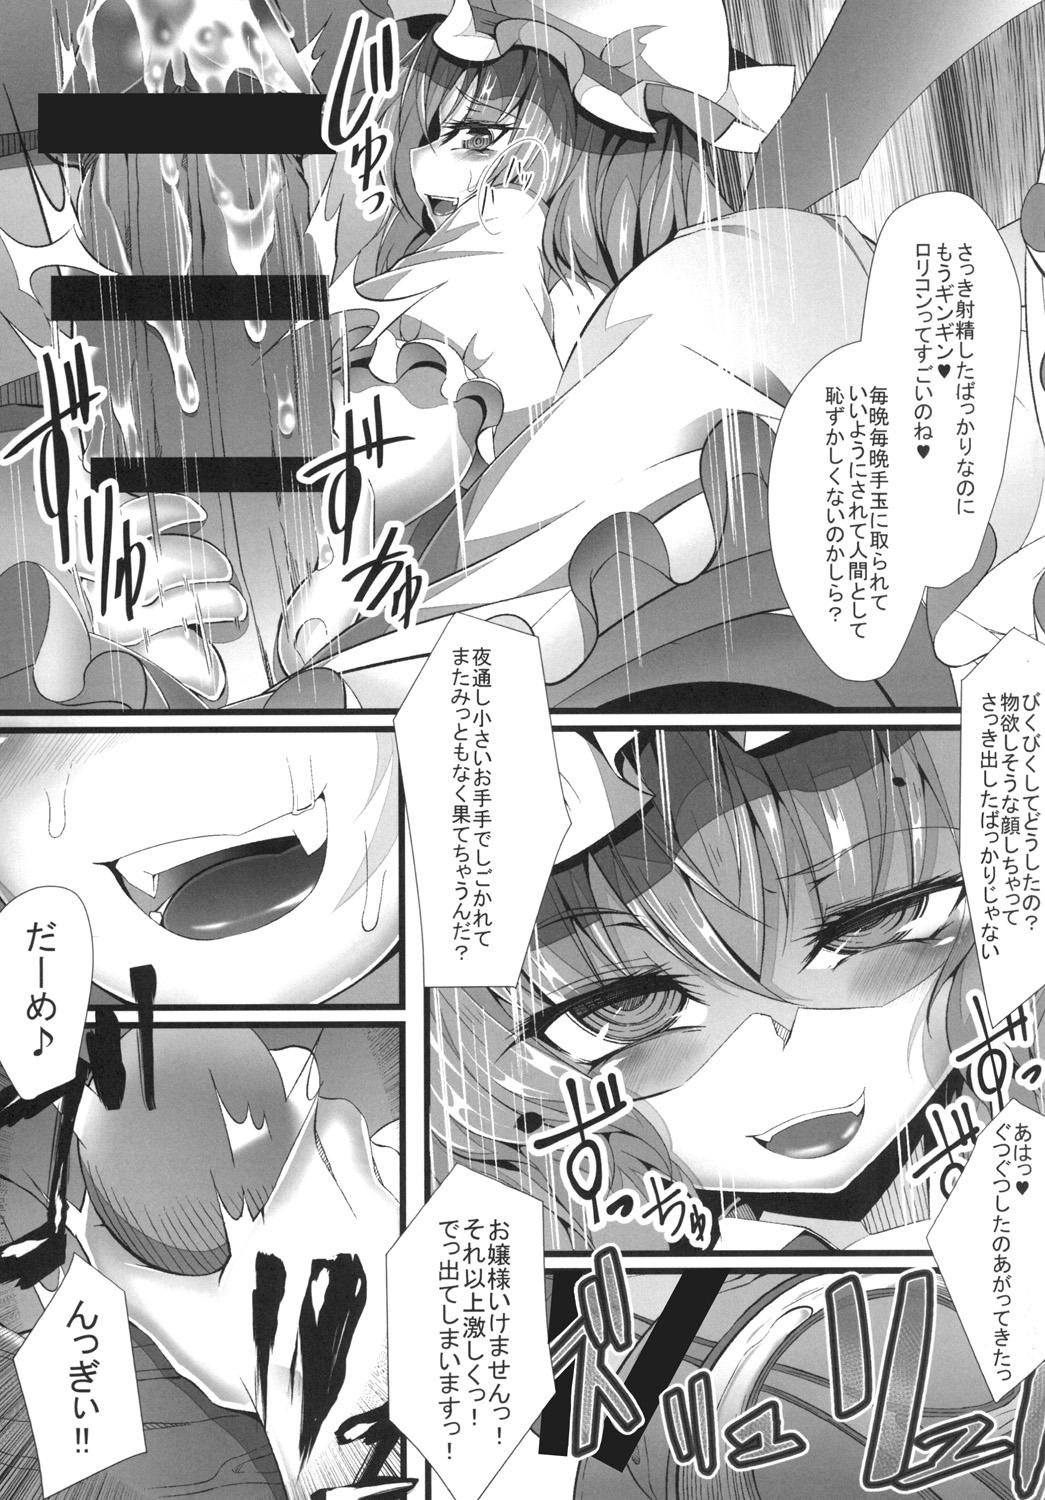 Pale M.P. Vol. 9 - Touhou project Dicksucking - Page 7